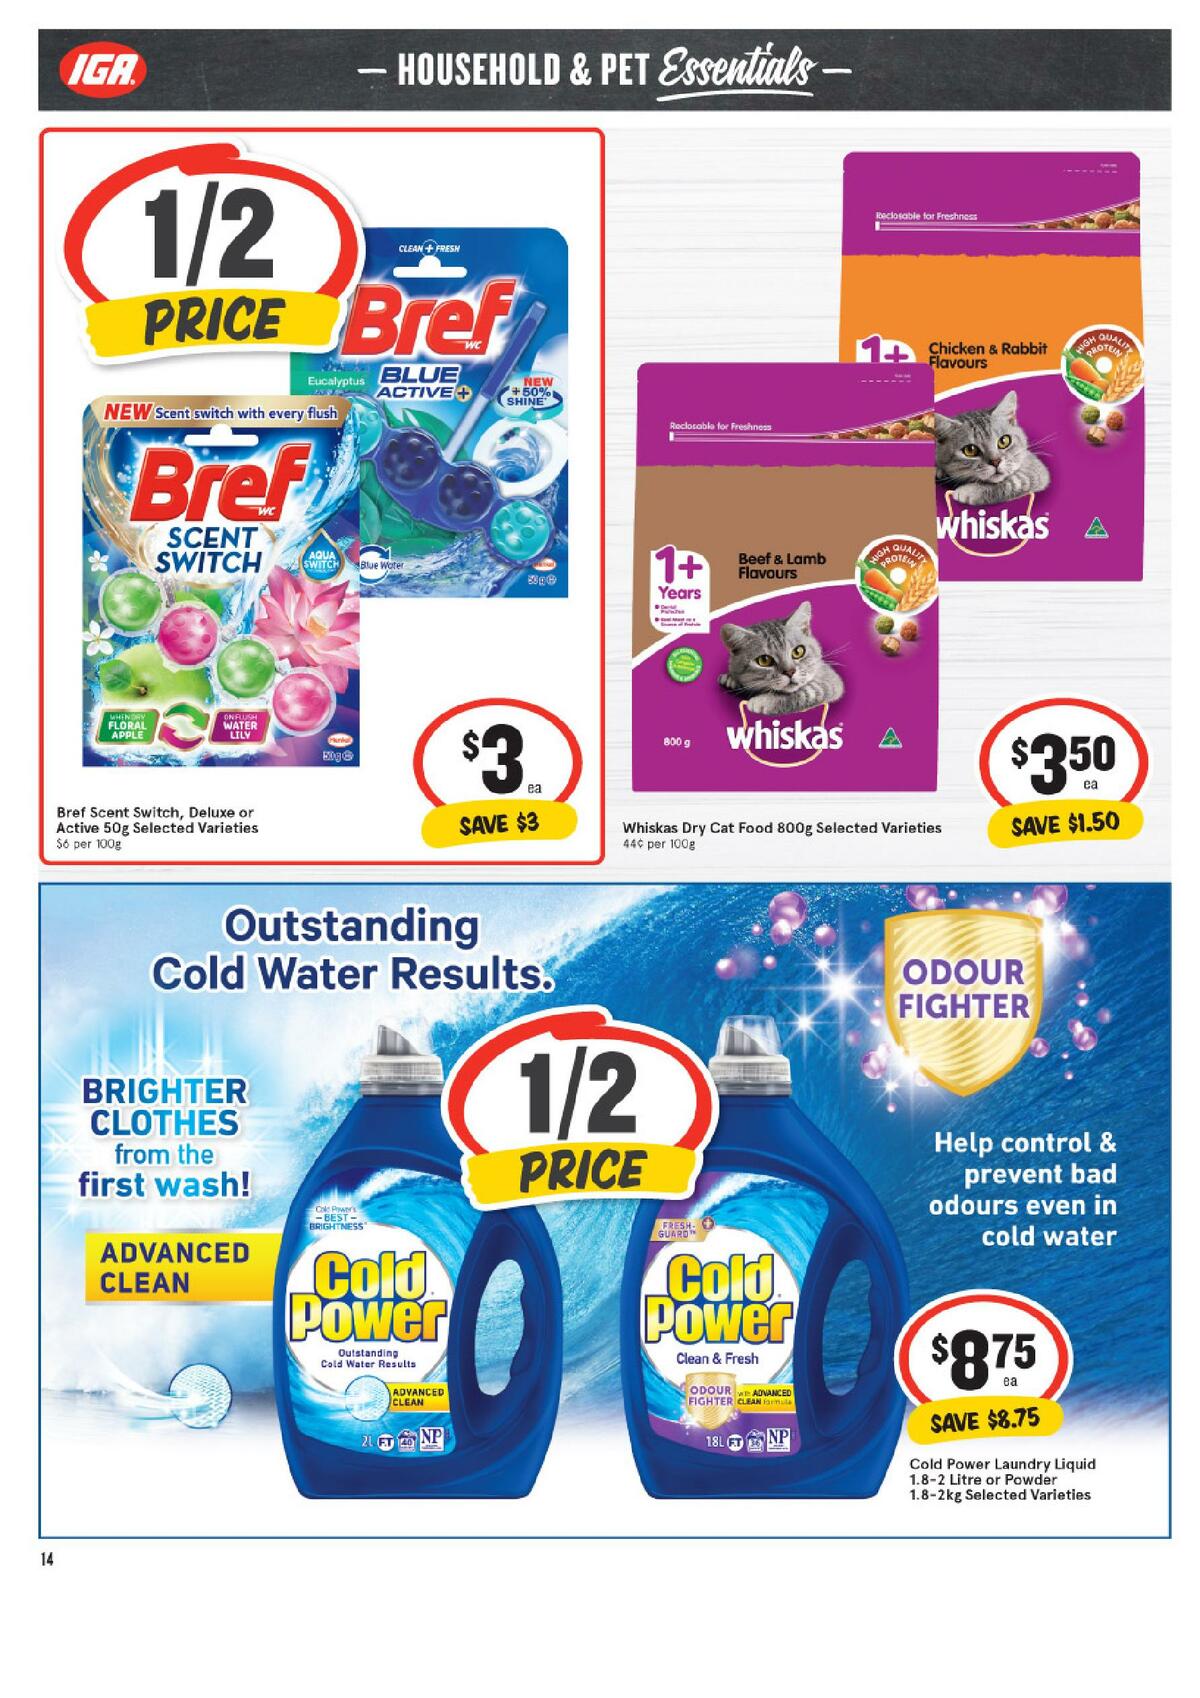 IGA Catalogues from 21 April